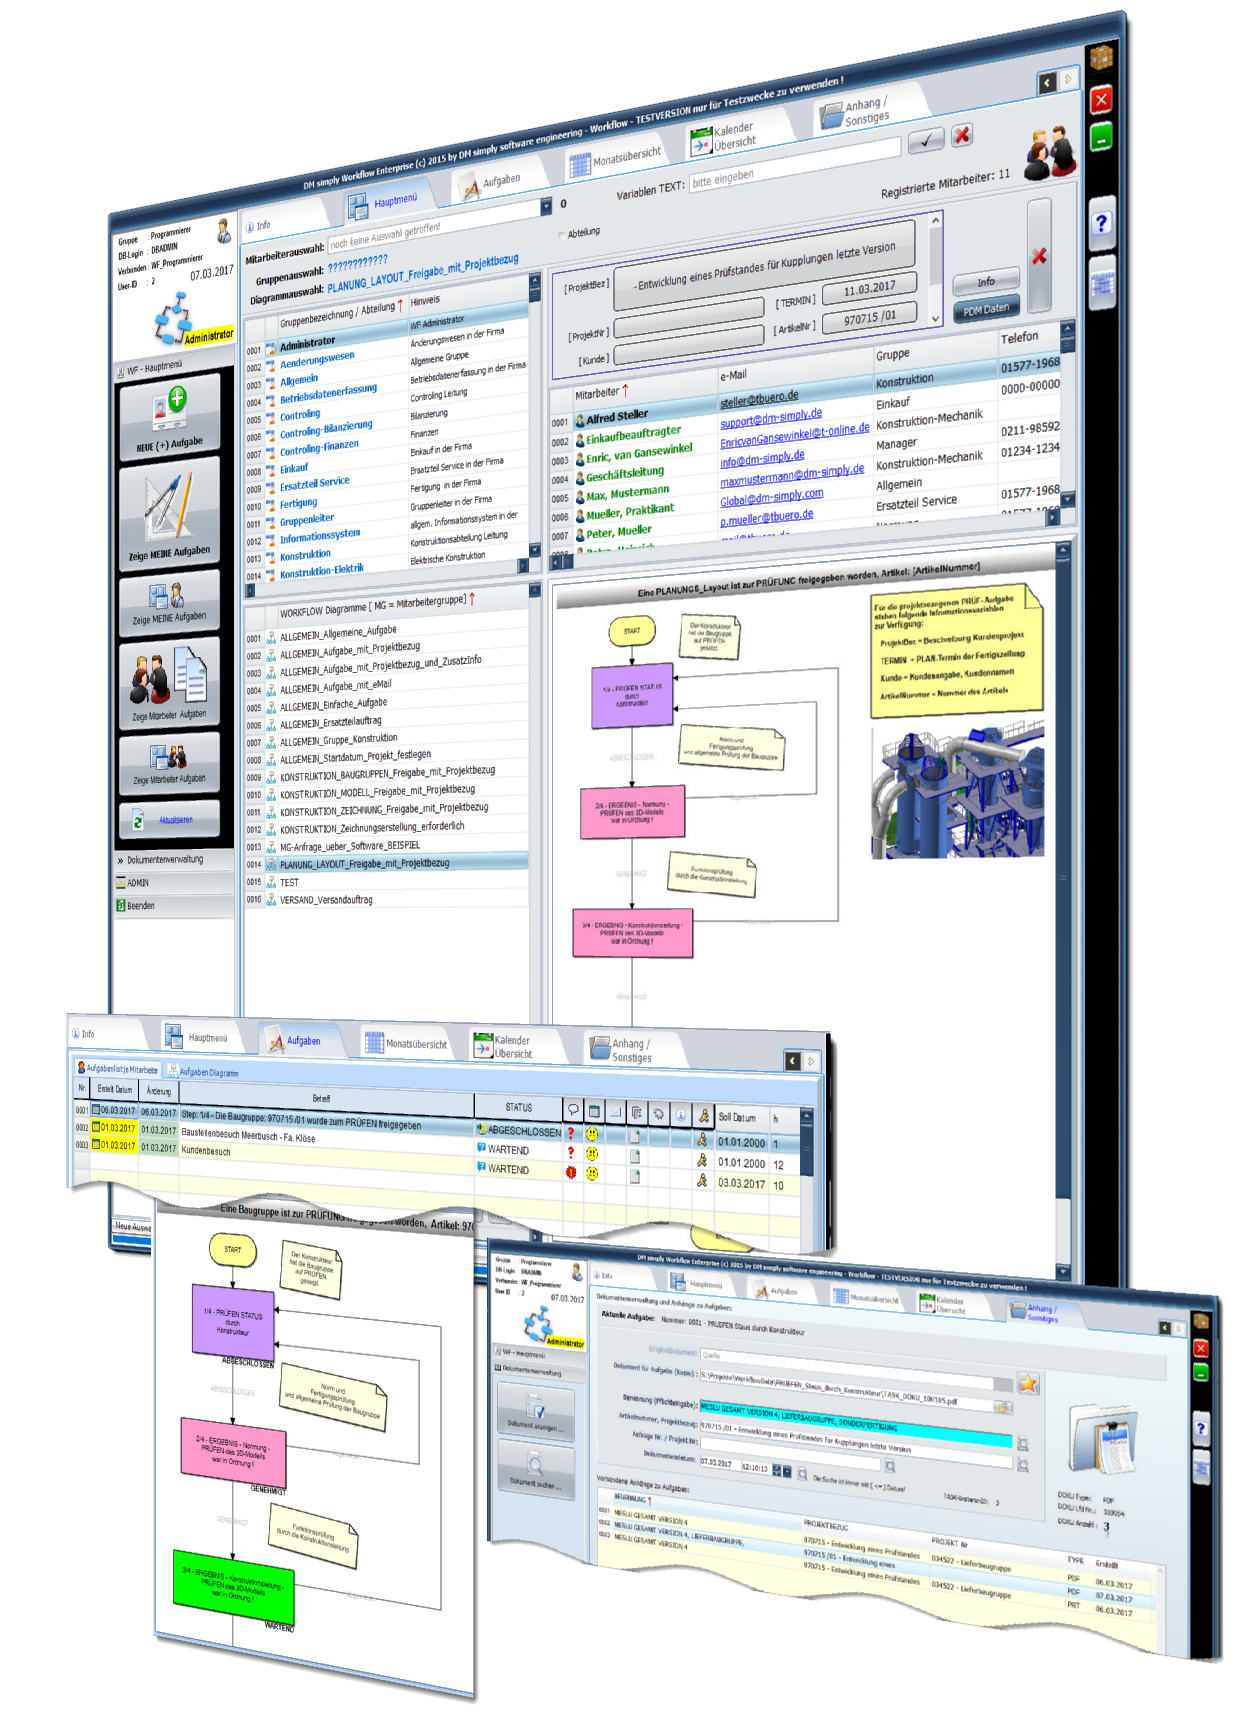 DM simply Workflow Management